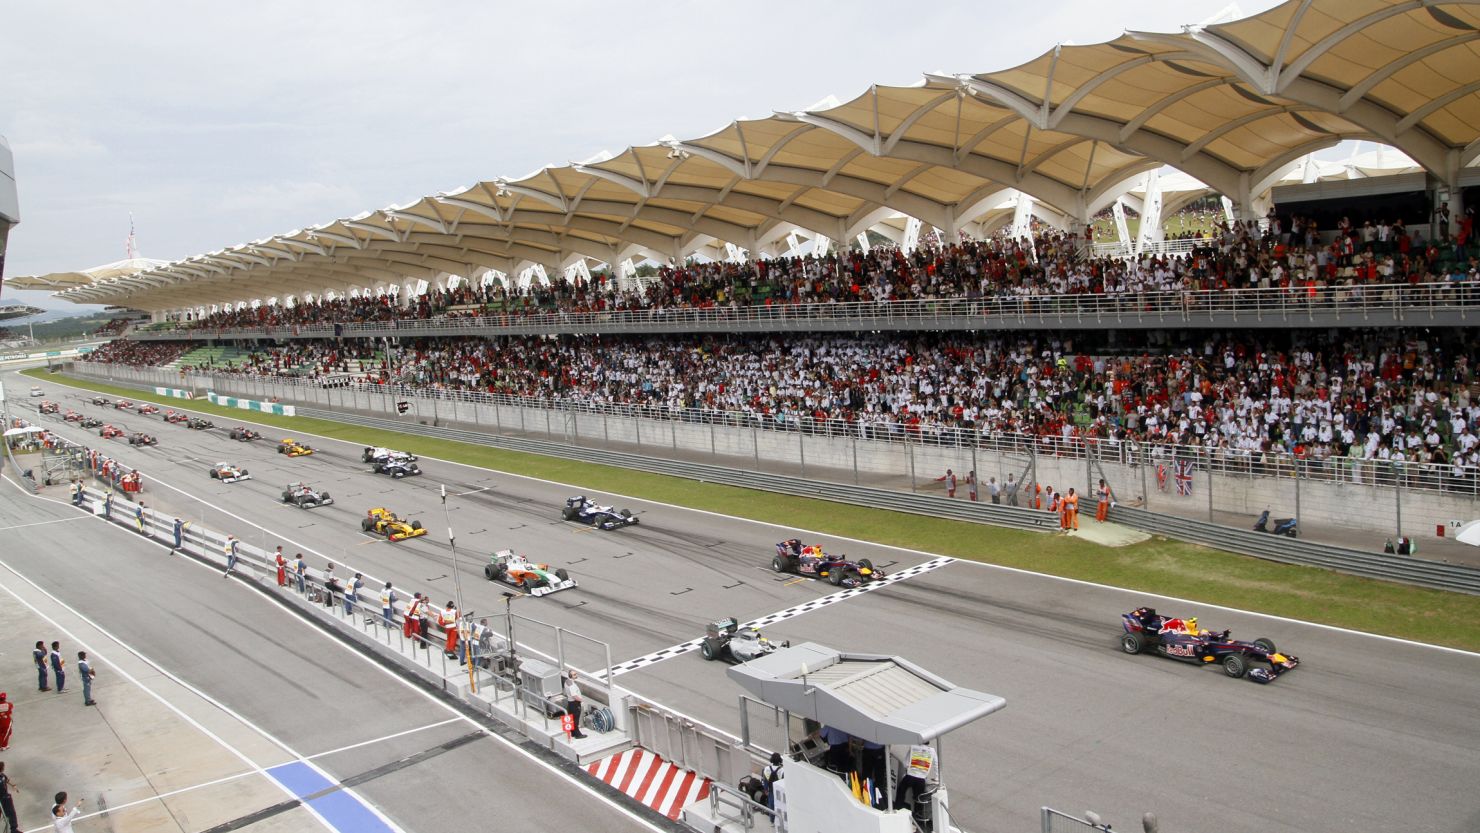 The Bahrain Grand Prix was due to be the opening race of the 2011 season, before being cancelled.